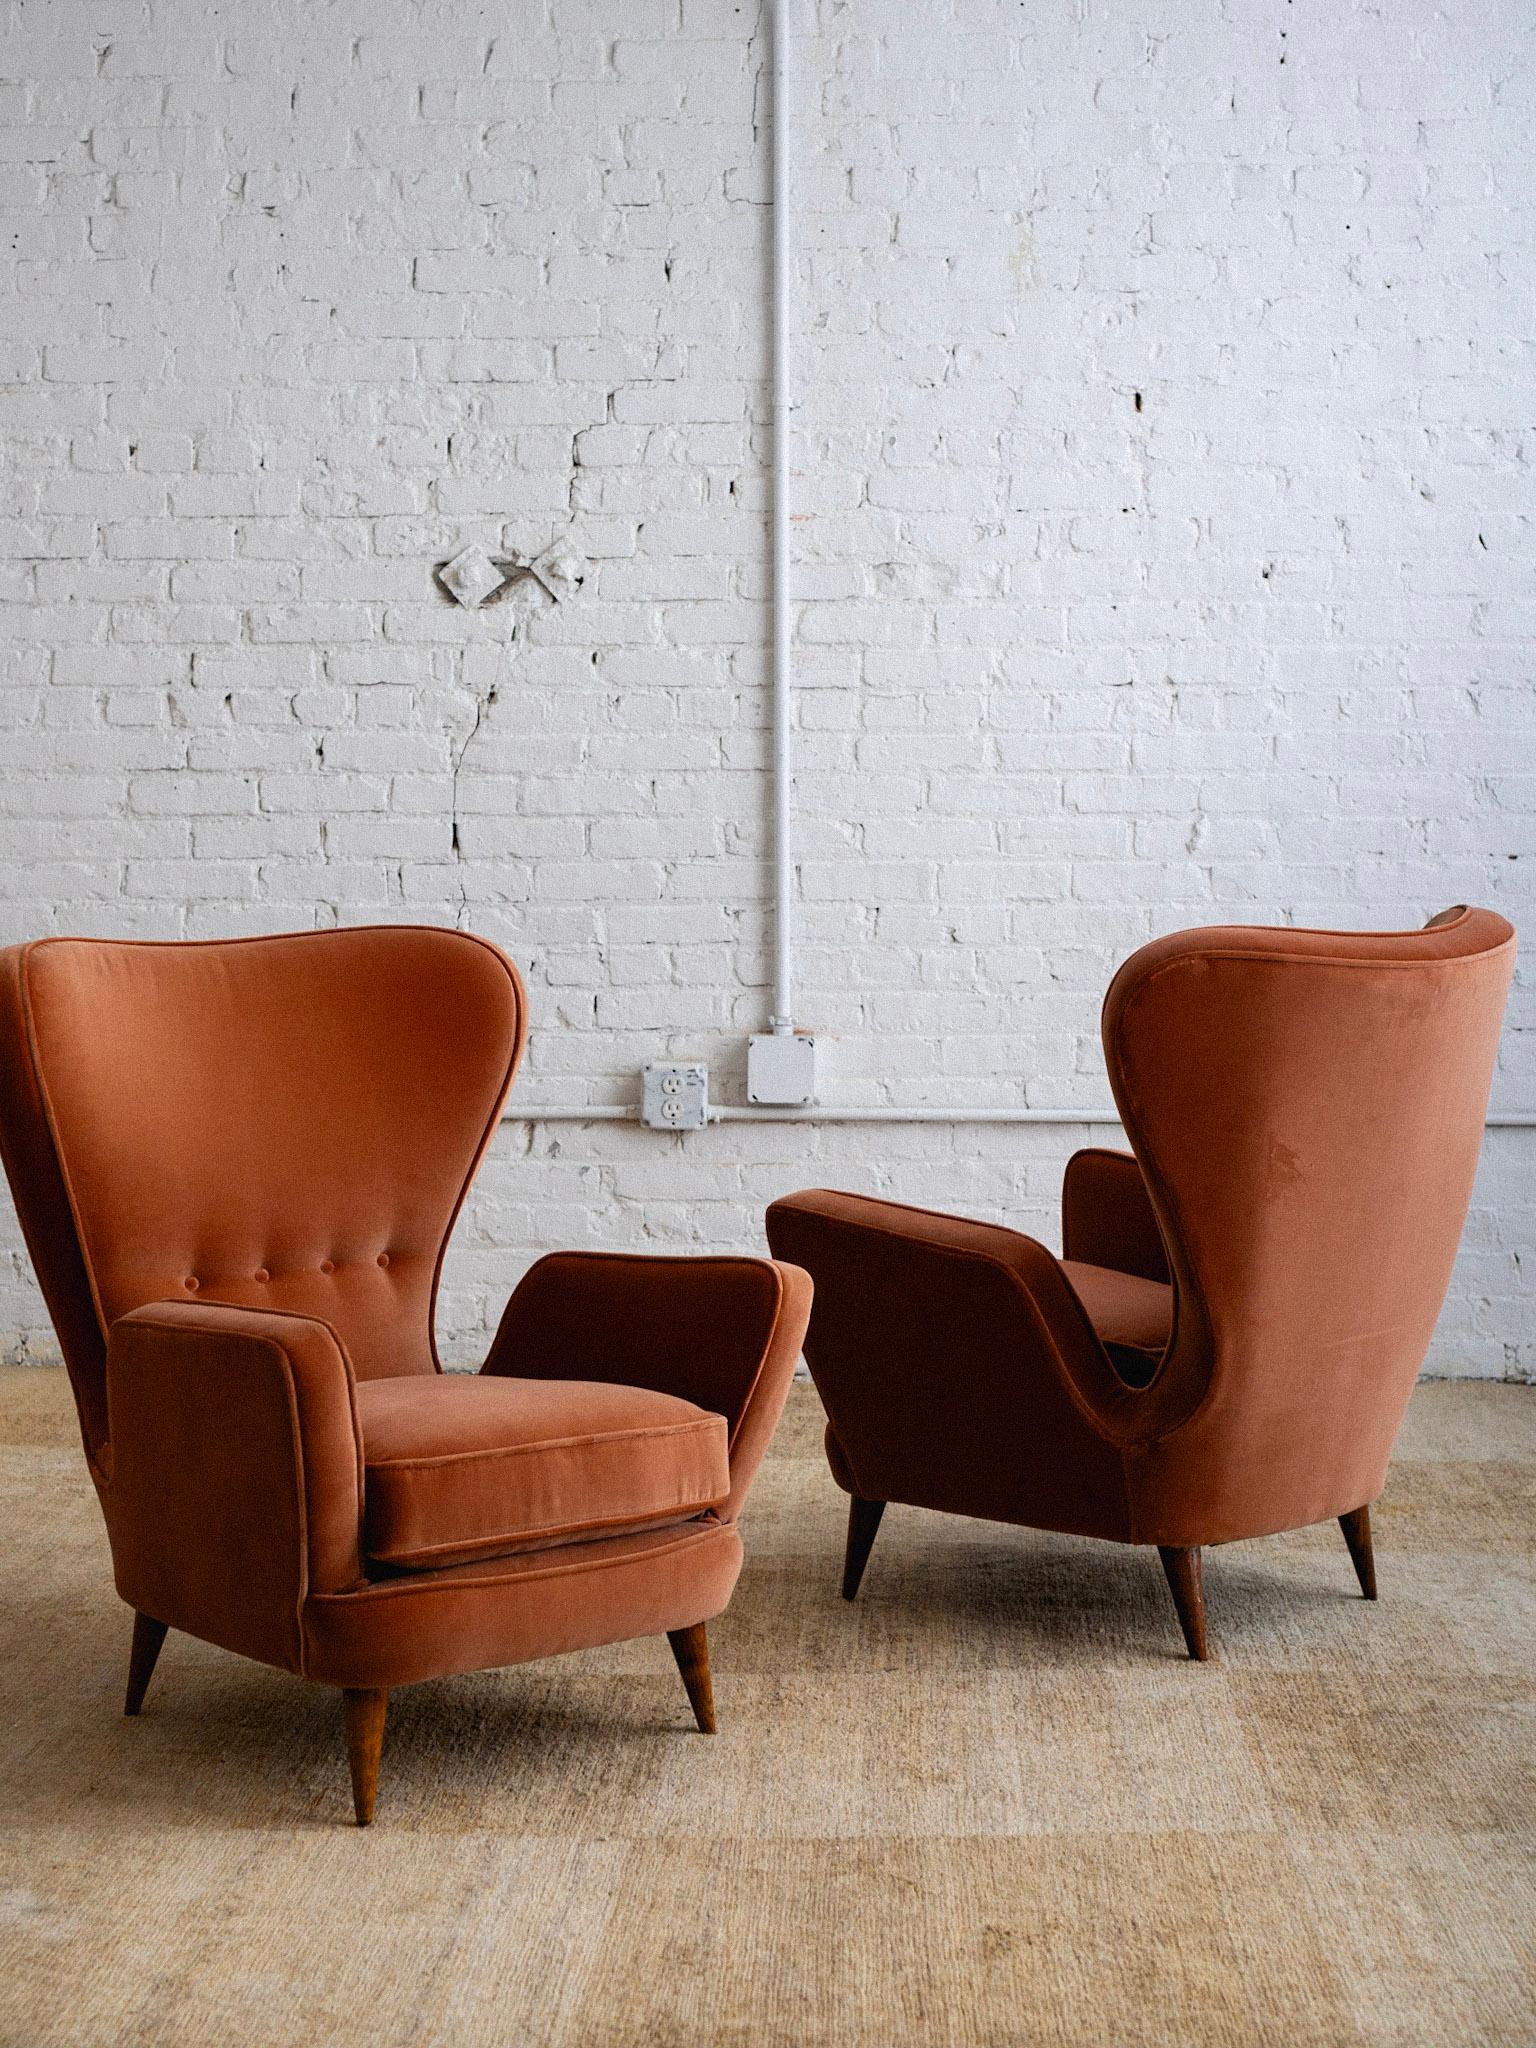 A pair of petite armchairs designed by Emilio Sala and Giorgio Madini and manufactured by Fratelli Galimberti. Wingback style silhouette. Newly upholstered in a salmon colored velvet. Sourced in Northern Italy. 